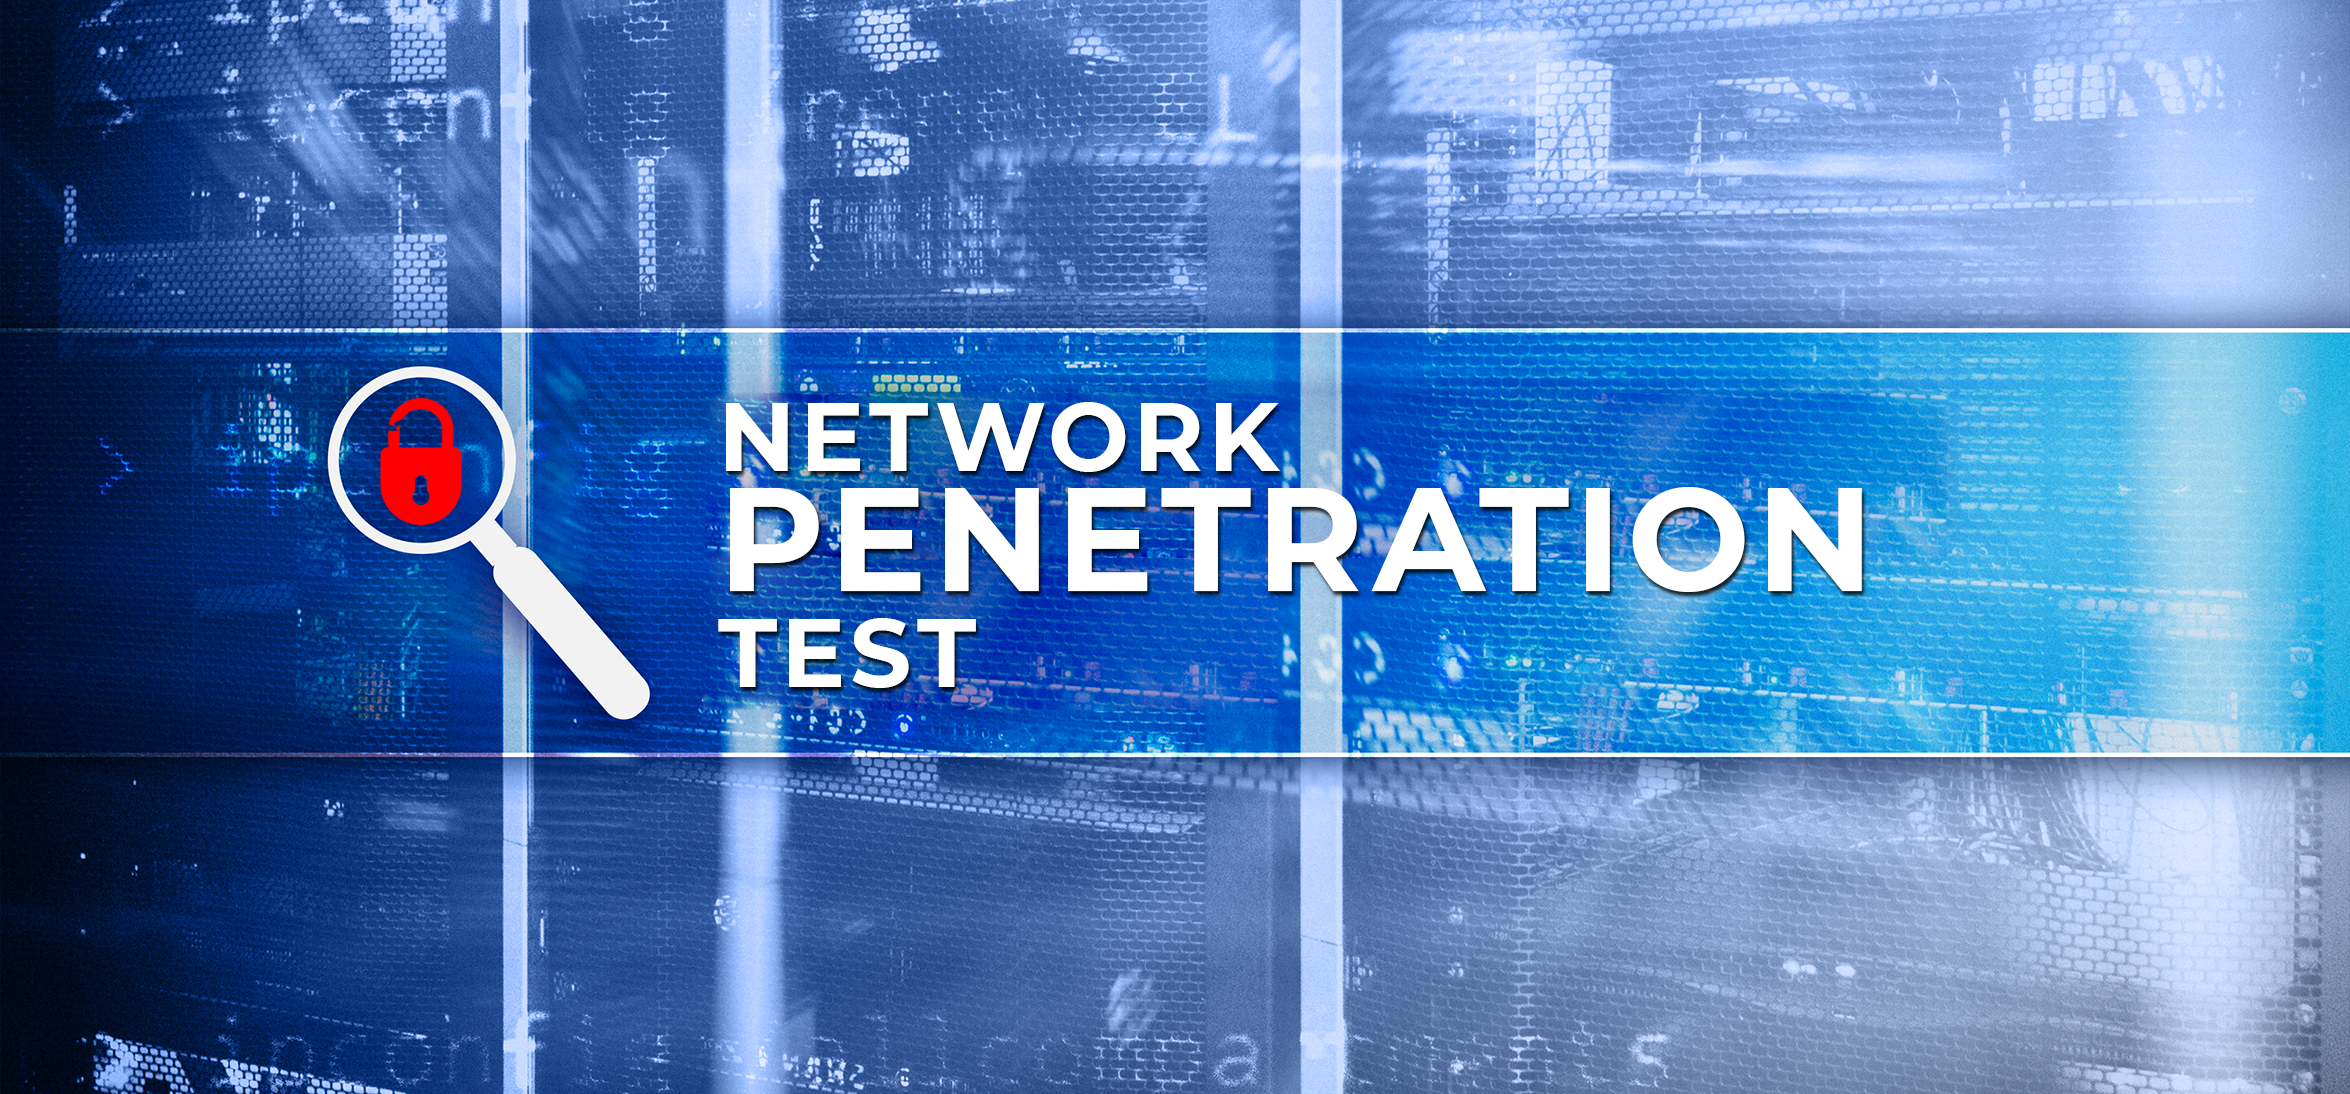 Penetration Testing Services in Northvale NJ, 07647